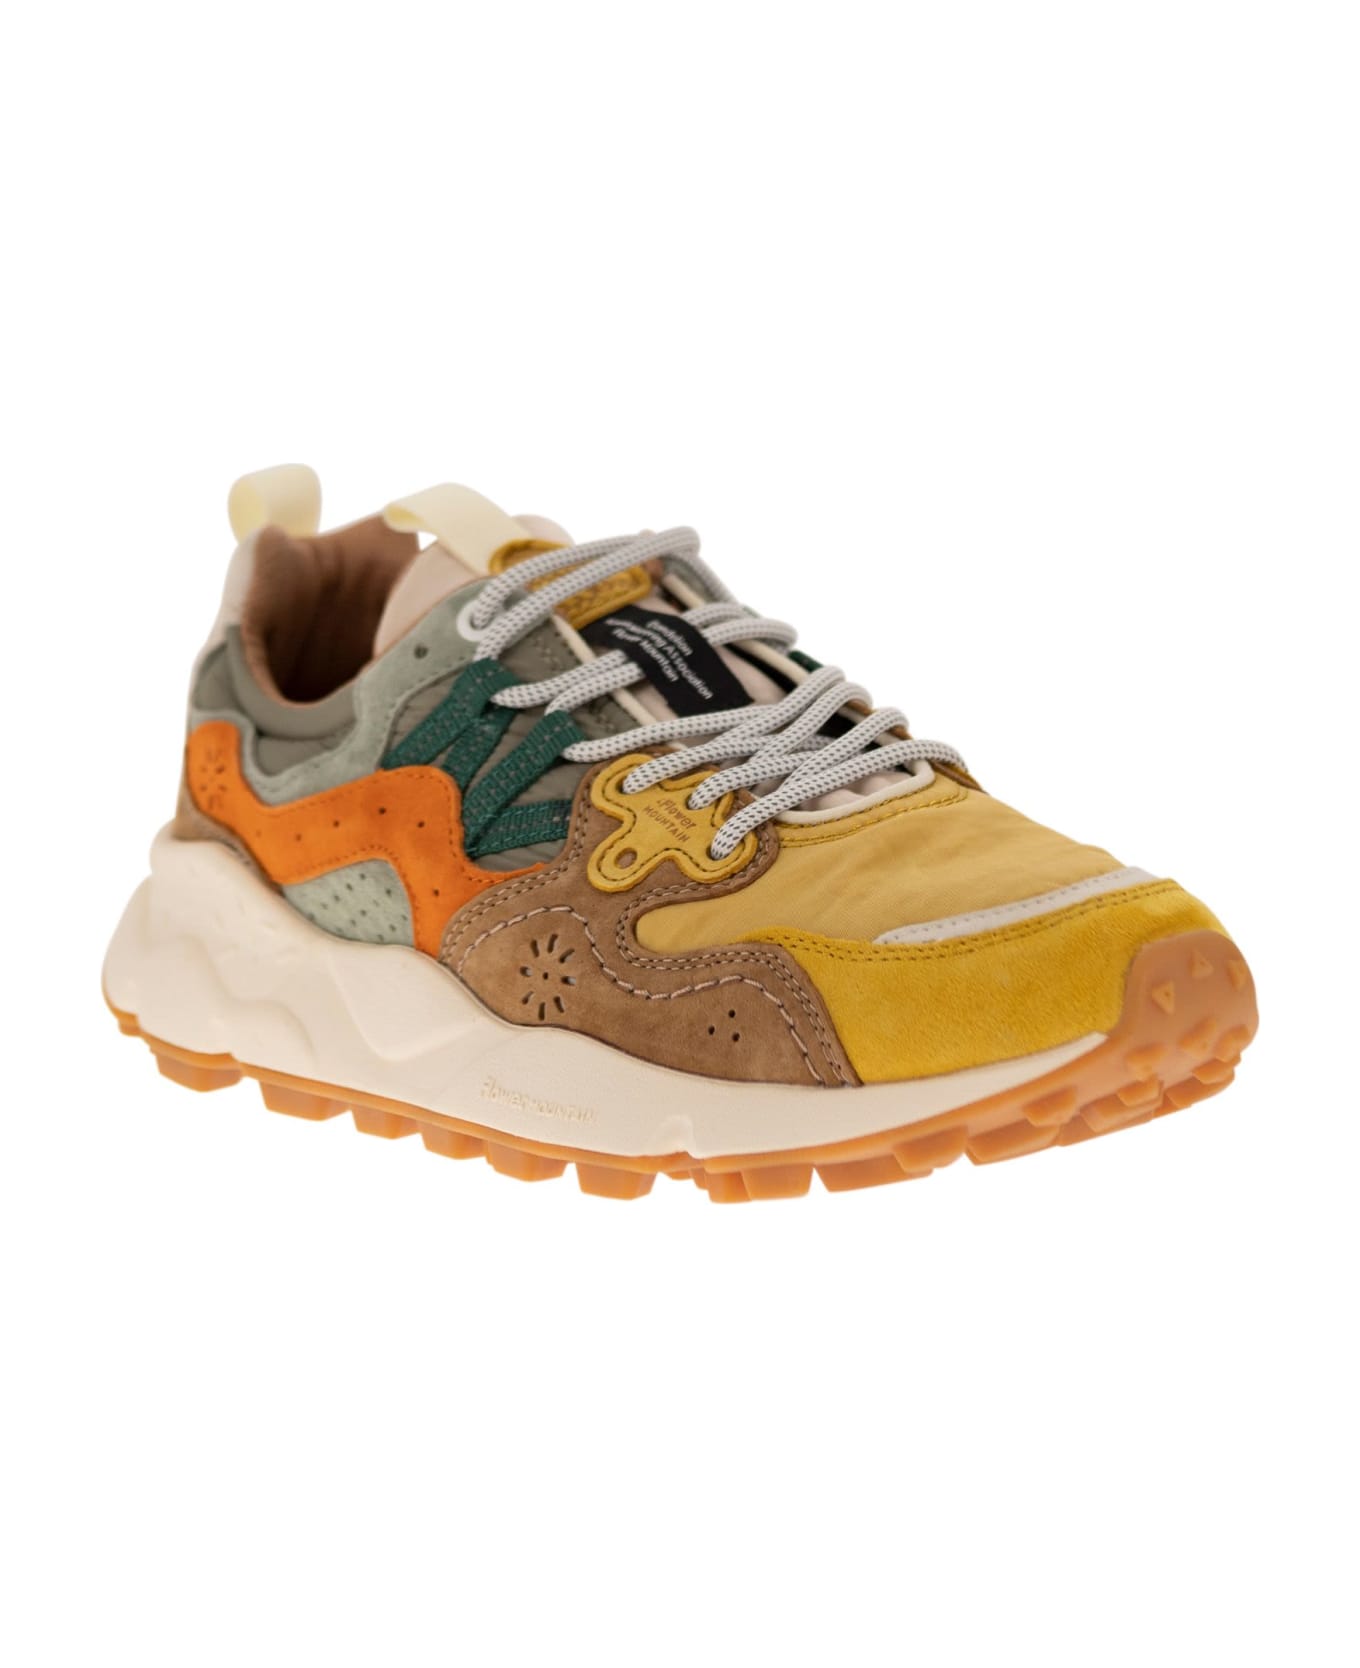 Flower Mountain Yamano 3 - Sneakers In Suede And Technical Fabric - Orange/military